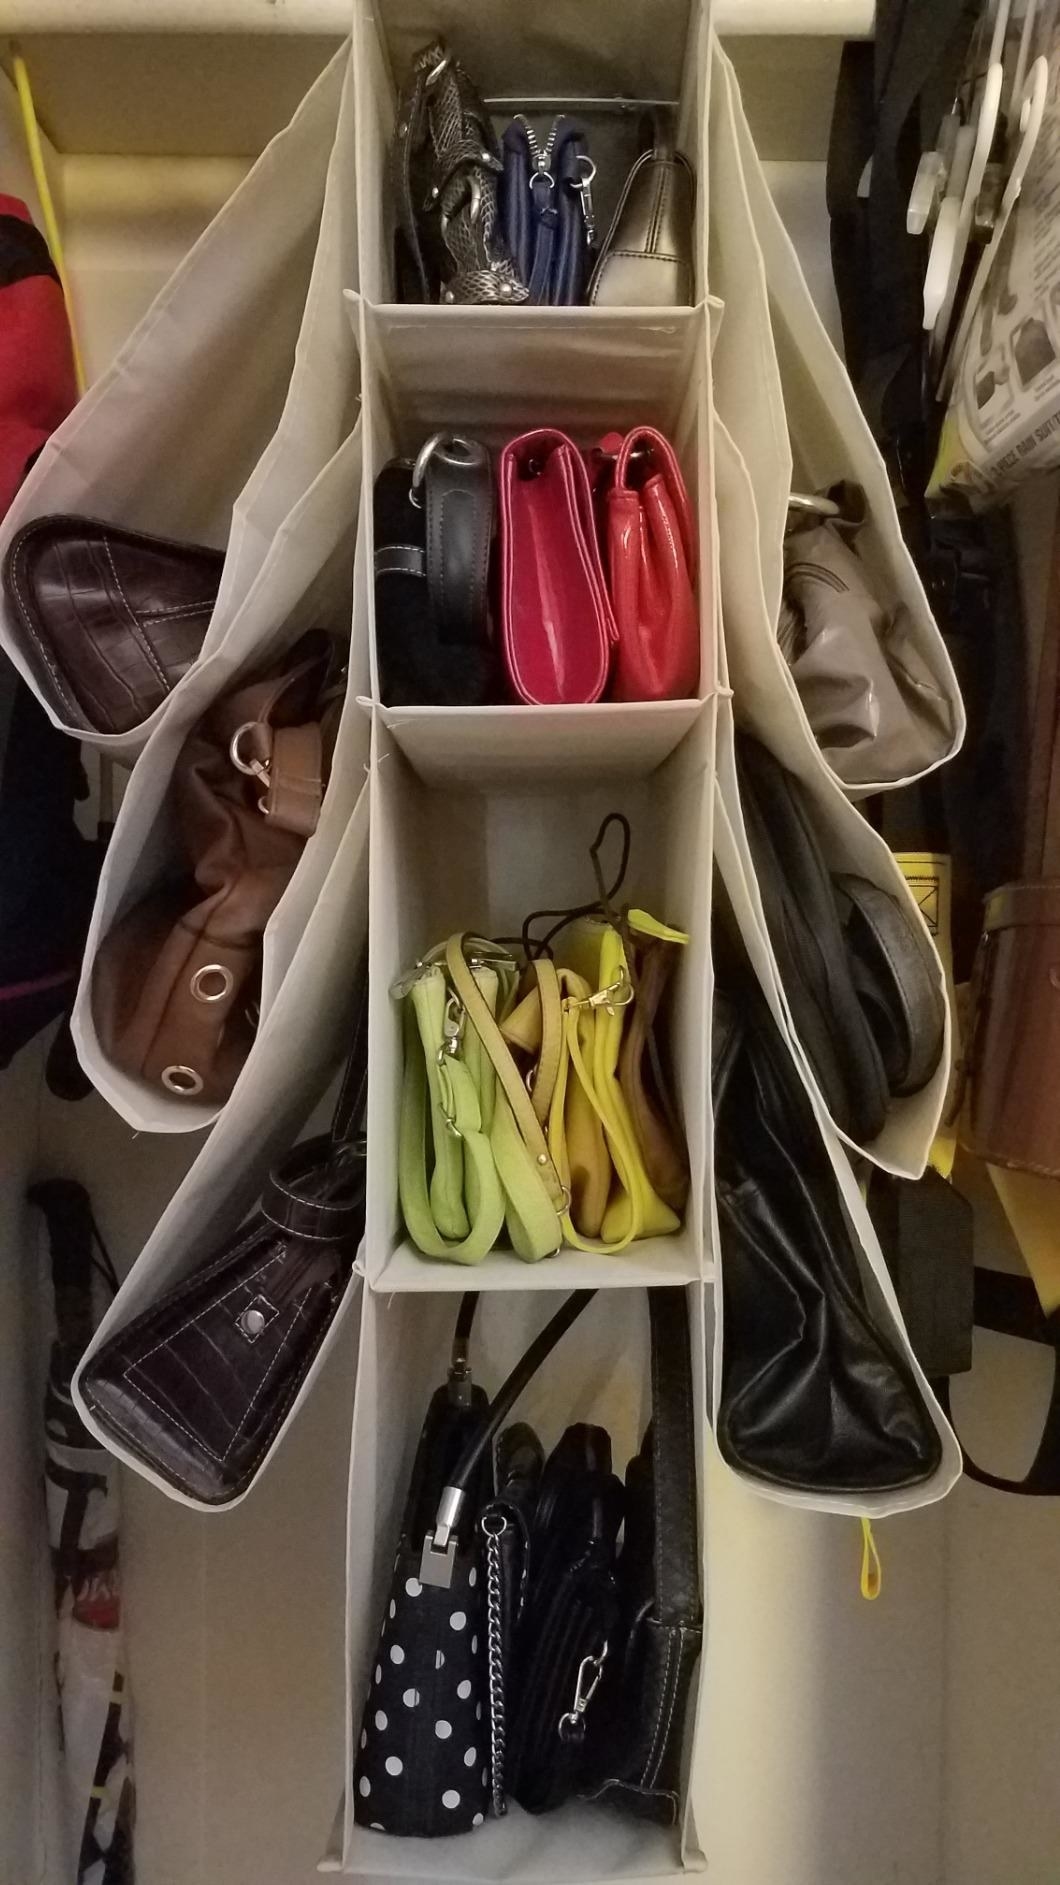 A tan-colored cloth handbag storage rack with metal hooks hanging in a closet